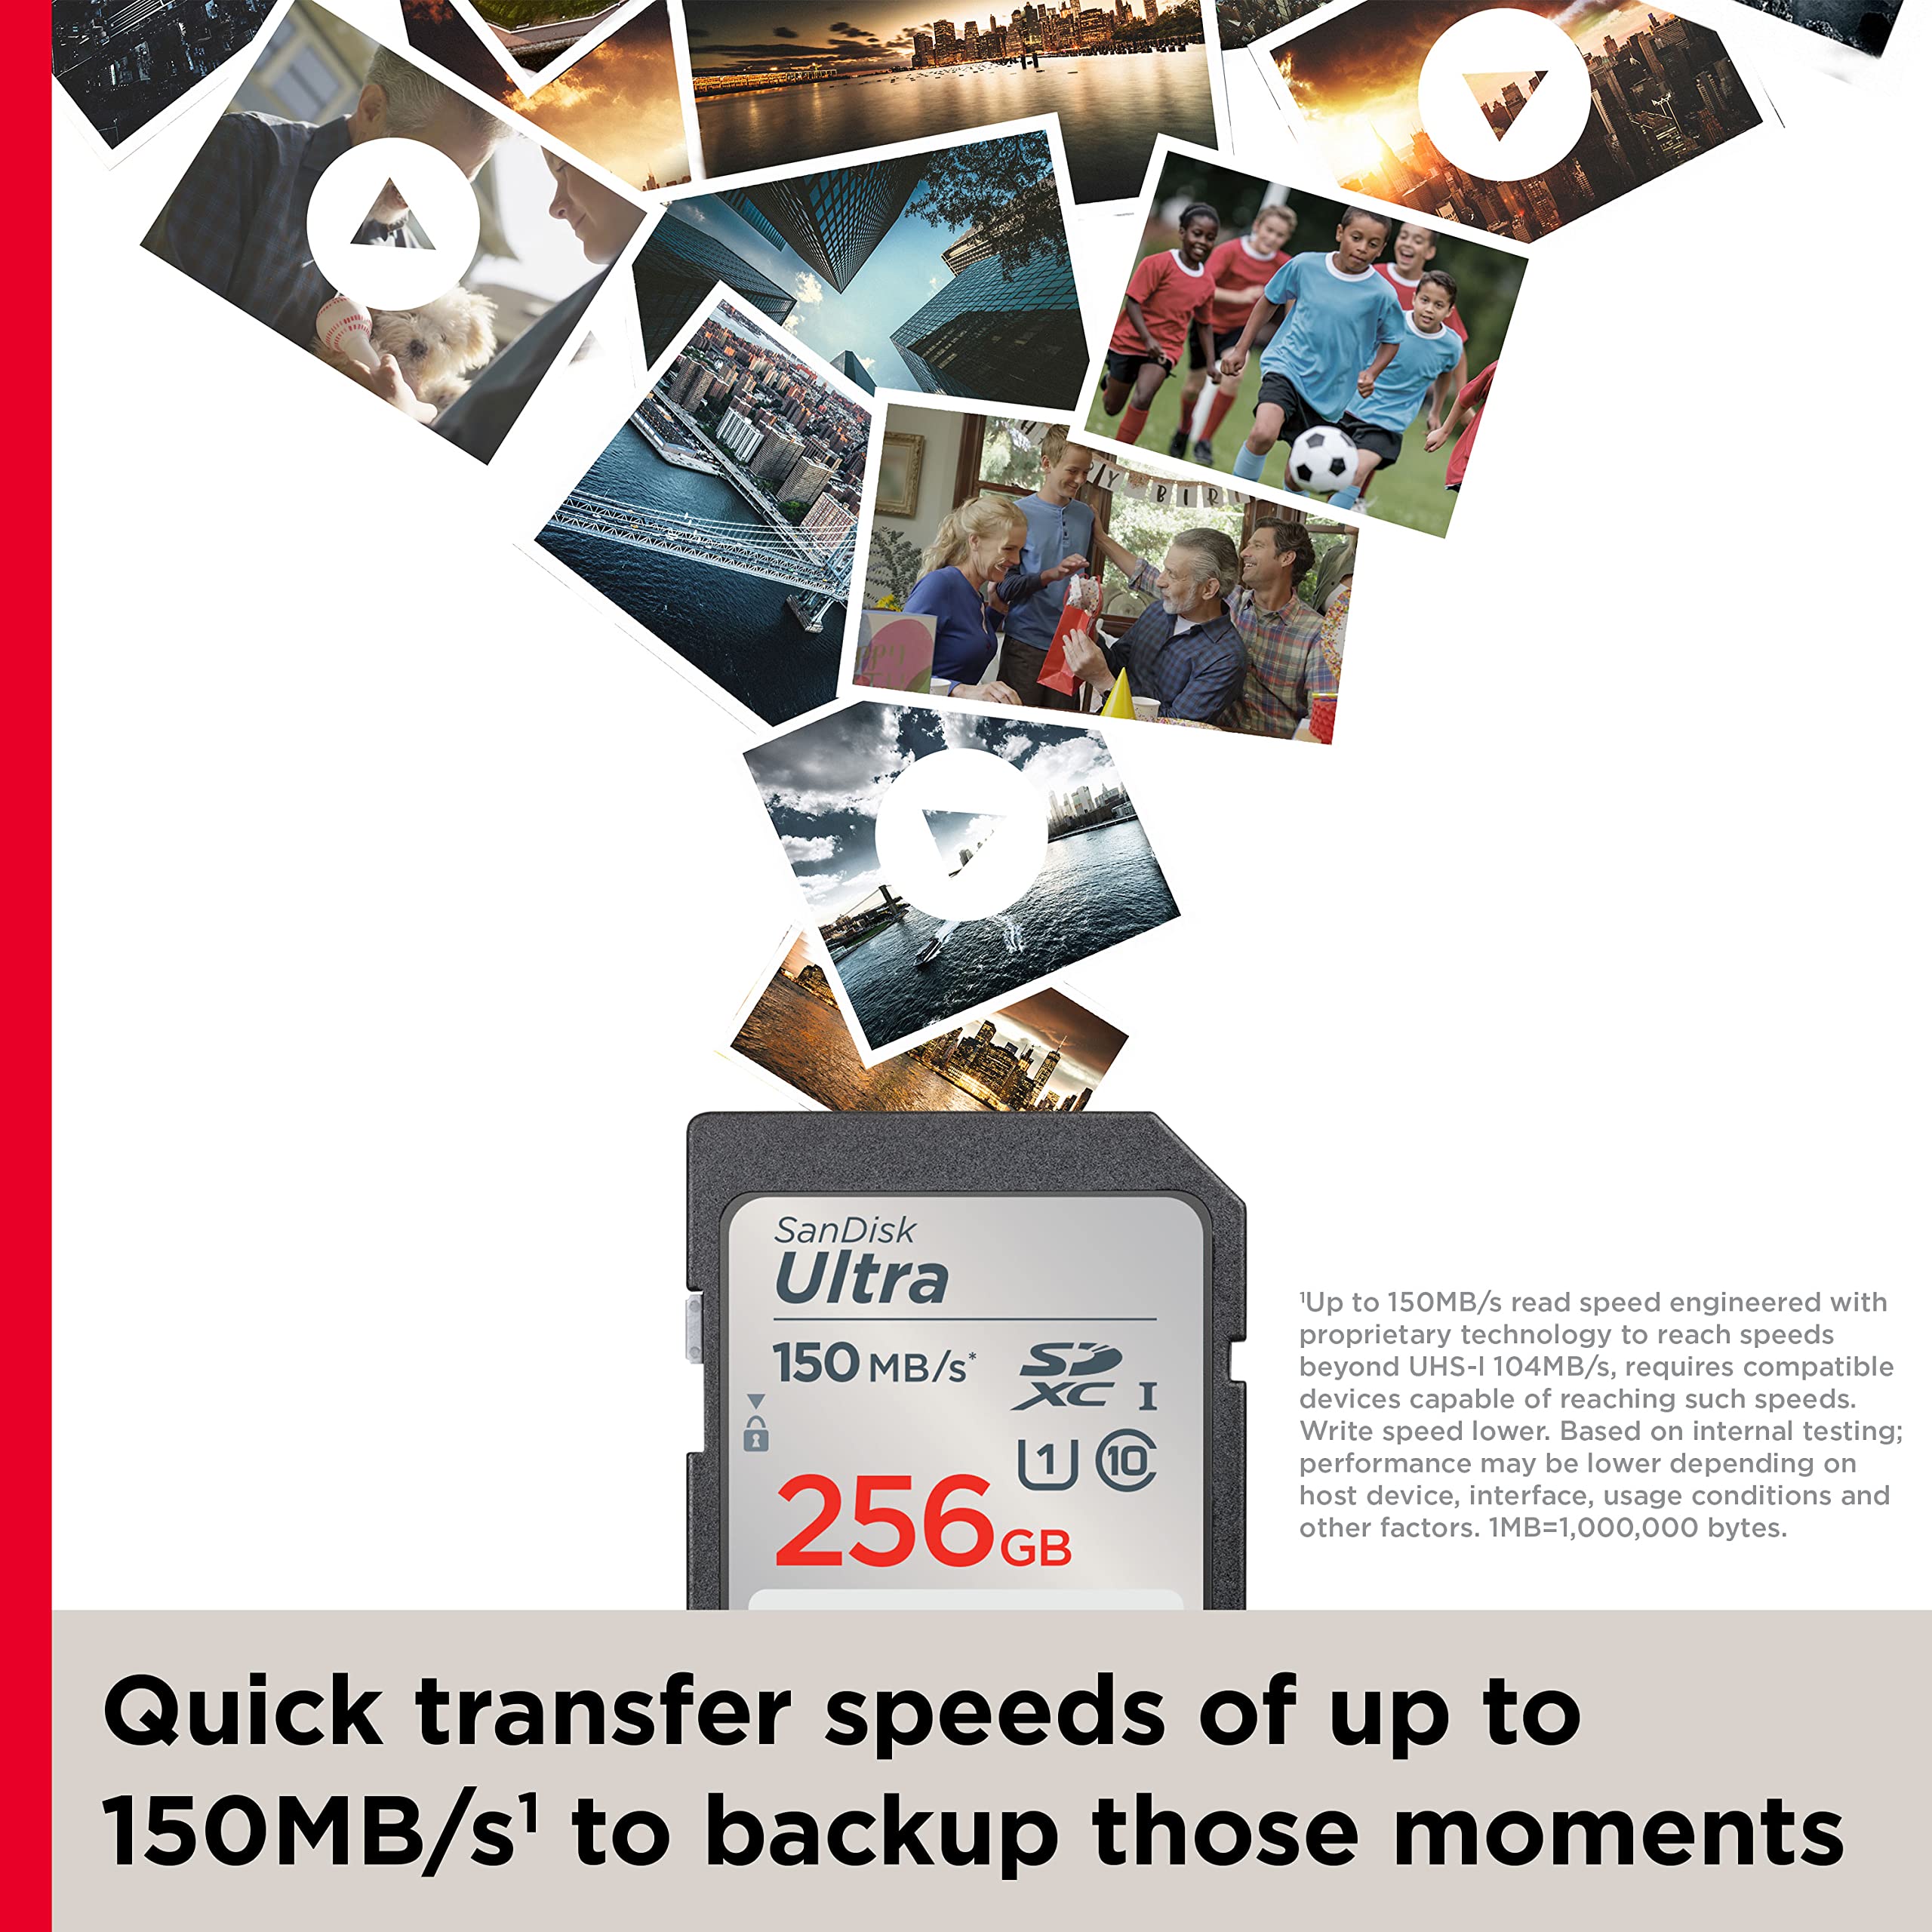 SanDisk 256GB Ultra SDXC UHS-I Memory Card - Up to 150MB/s, C10, U1, Full HD, SD Card - SDSDUNC-256G-GN6IN